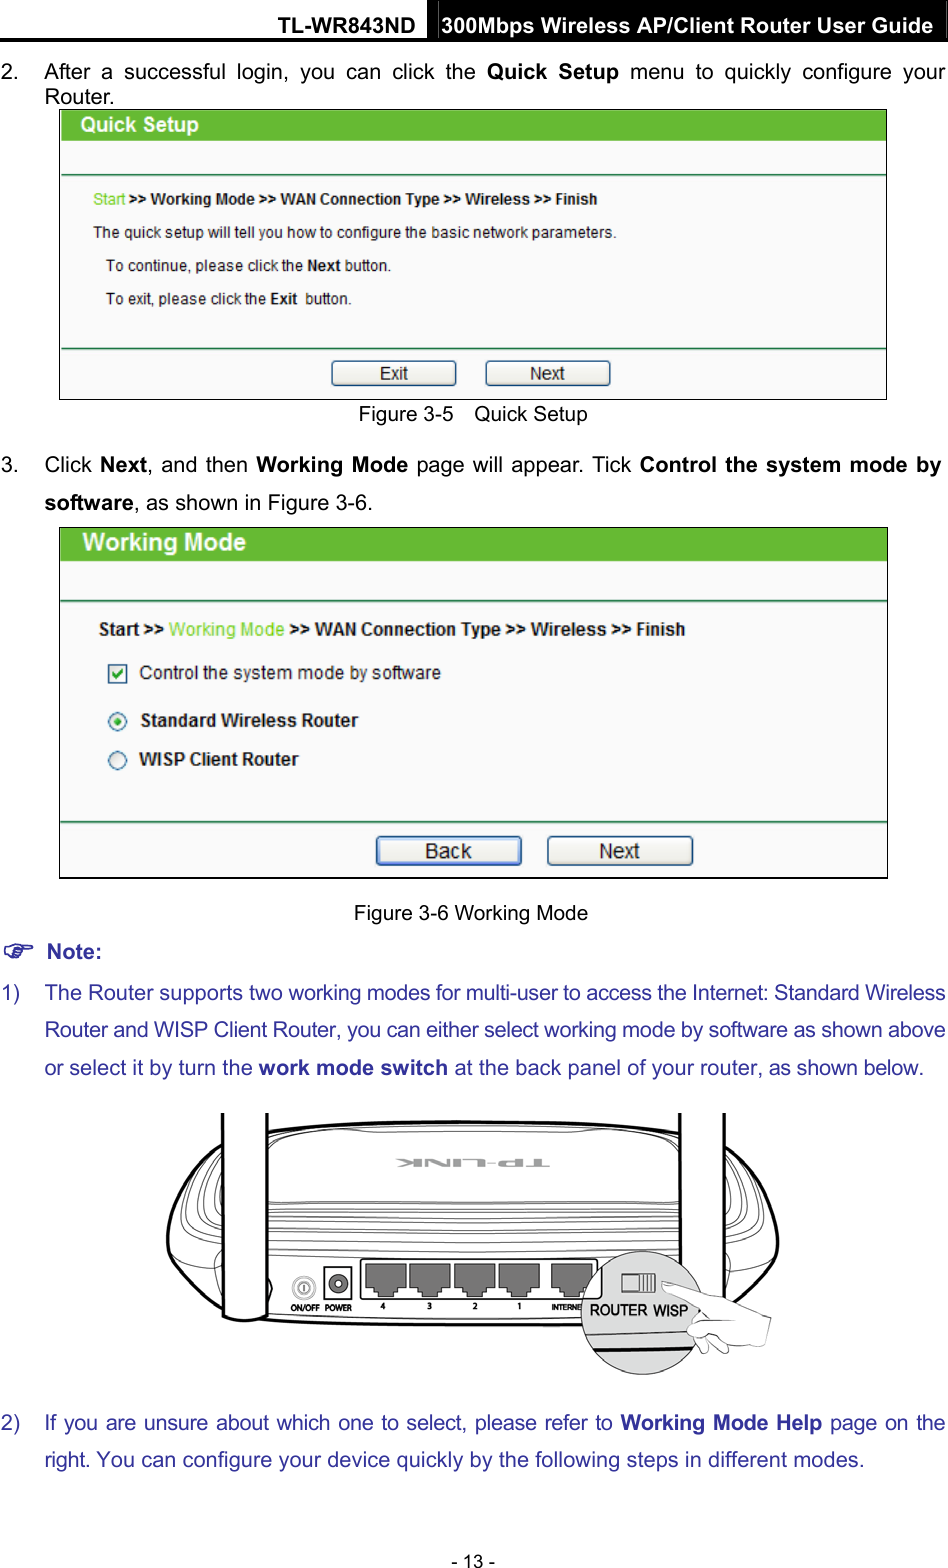 TL-WR843ND 300Mbps Wireless AP/Client Router User Guide - 13 - 2.  After a successful login, you can click the Quick Setup menu to quickly configure your Router.   Figure 3-5    Quick Setup 3. Click Next, and then Working Mode page will appear. Tick Control the system mode by software, as shown in Figure 3-6.   Figure 3-6 Working Mode  Note: 1)  The Router supports two working modes for multi-user to access the Internet: Standard Wireless Router and WISP Client Router, you can either select working mode by software as shown above or select it by turn the work mode switch at the back panel of your router, as shown below.  2)  If you are unsure about which one to select, please refer to Working Mode Help page on the right. You can configure your device quickly by the following steps in different modes. 